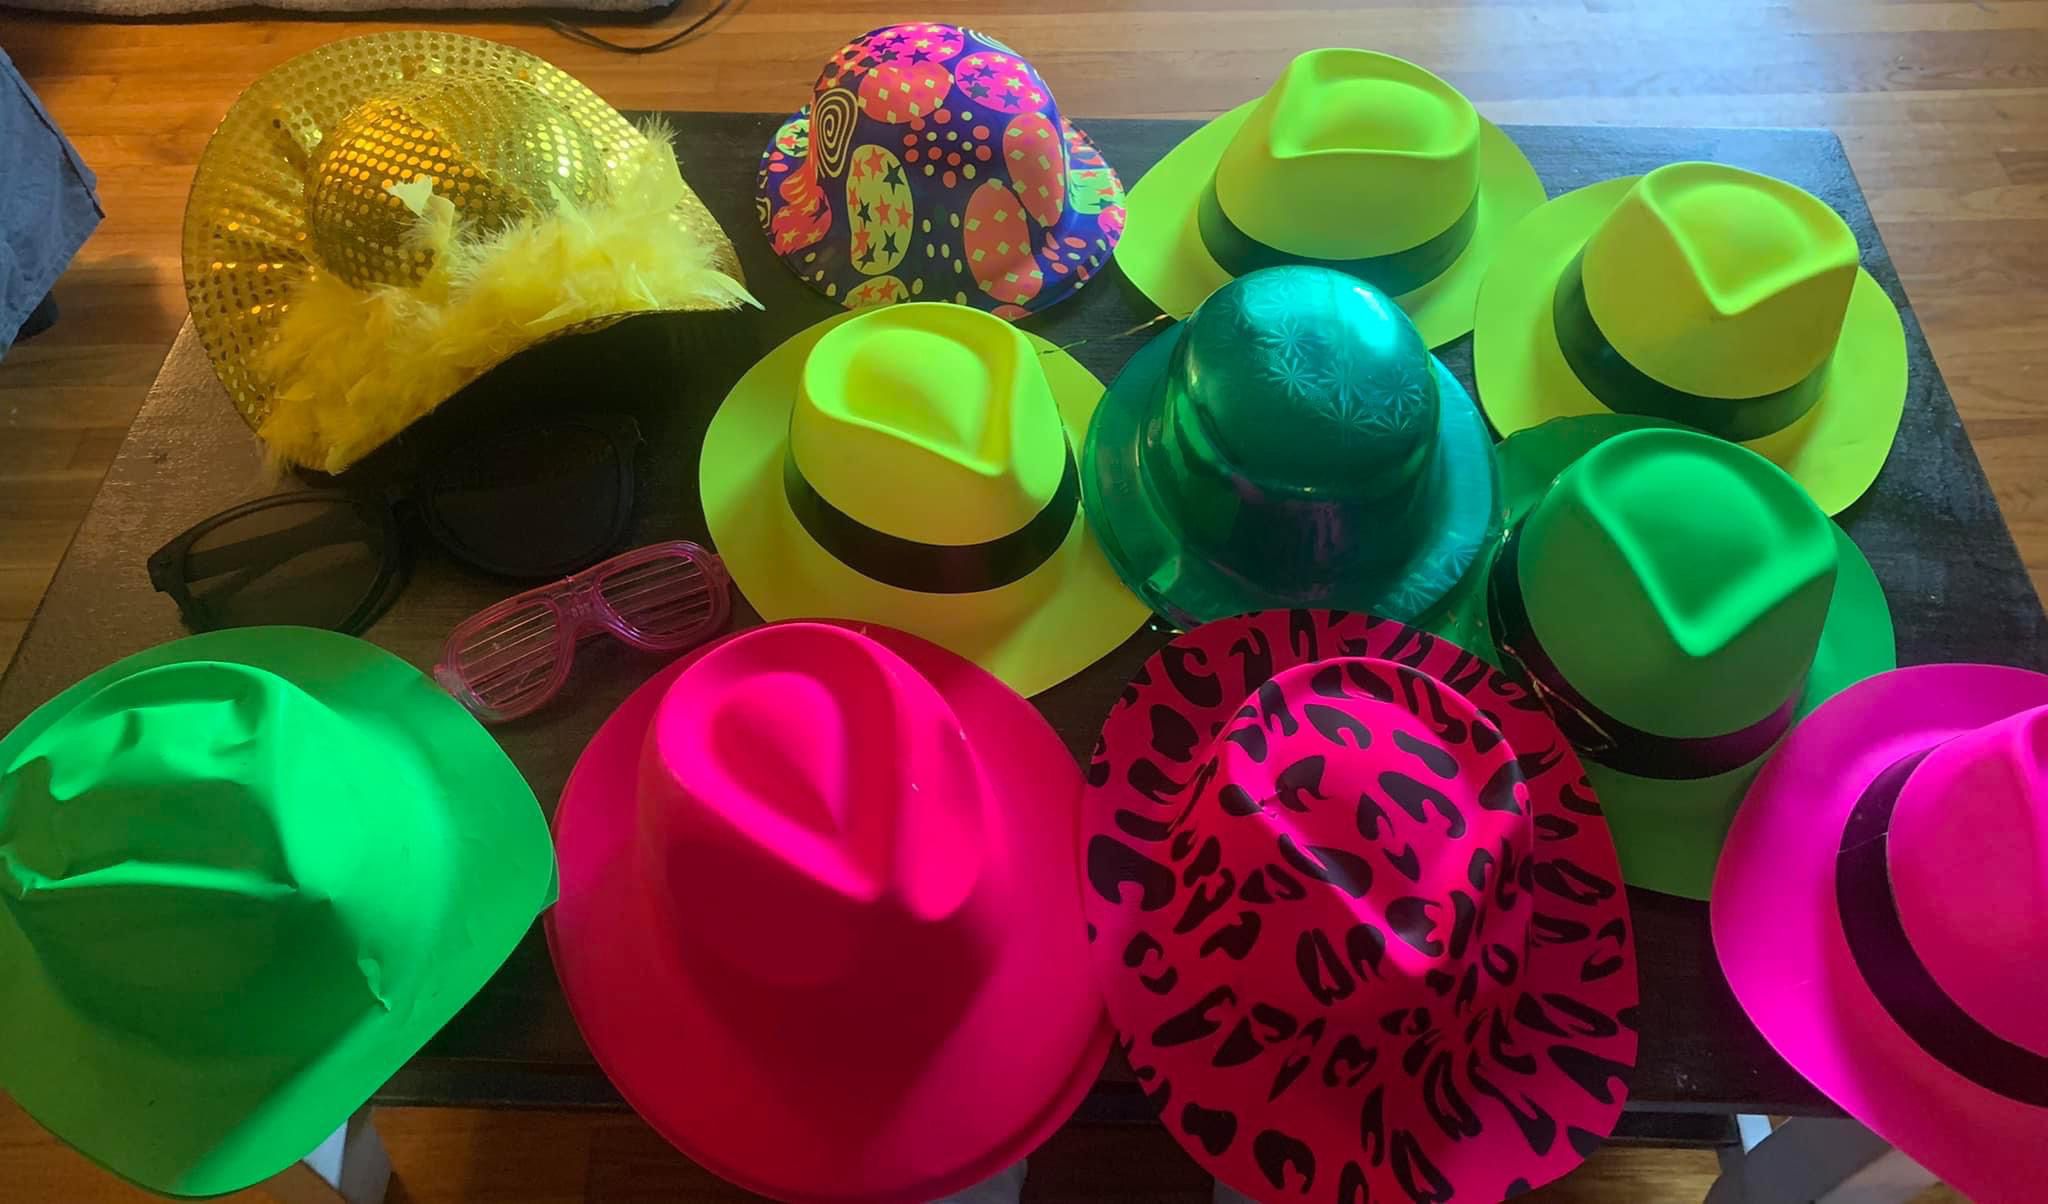 Photo Booth Props Large bag apx 20 pieces - hats & sunglasses. Price $10